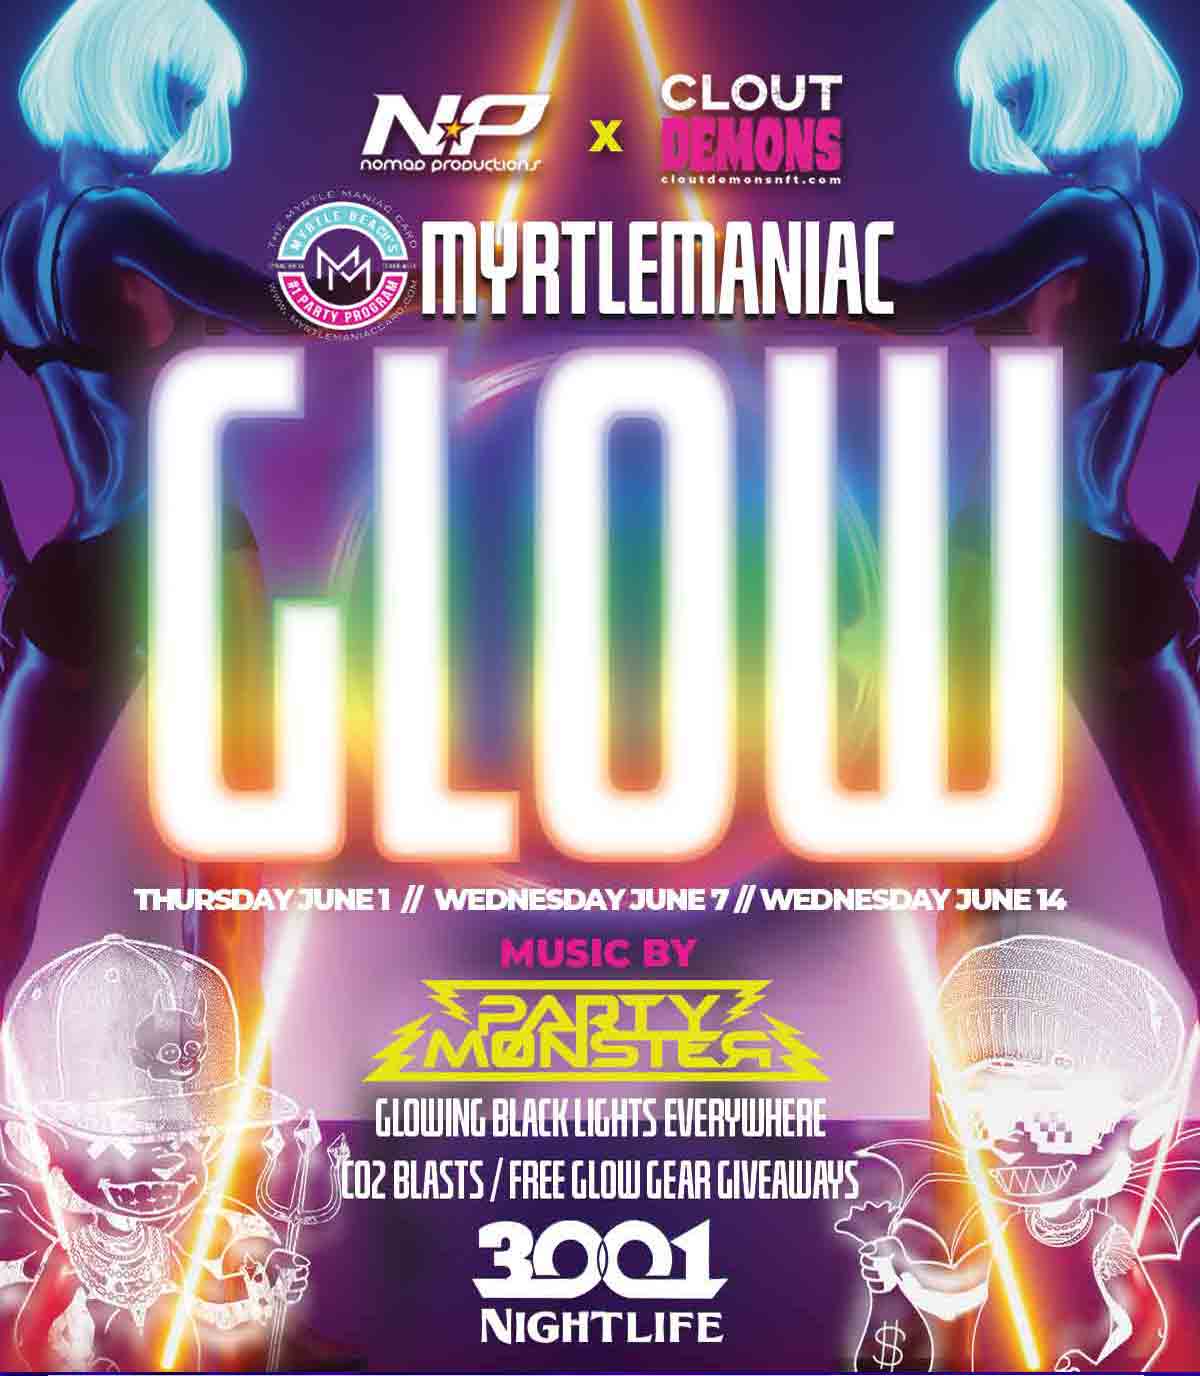 Clout Demons Clothing and Myrtle Maniac have teamed up with 3001 Nightlife for the most epic Glow Party in the USA